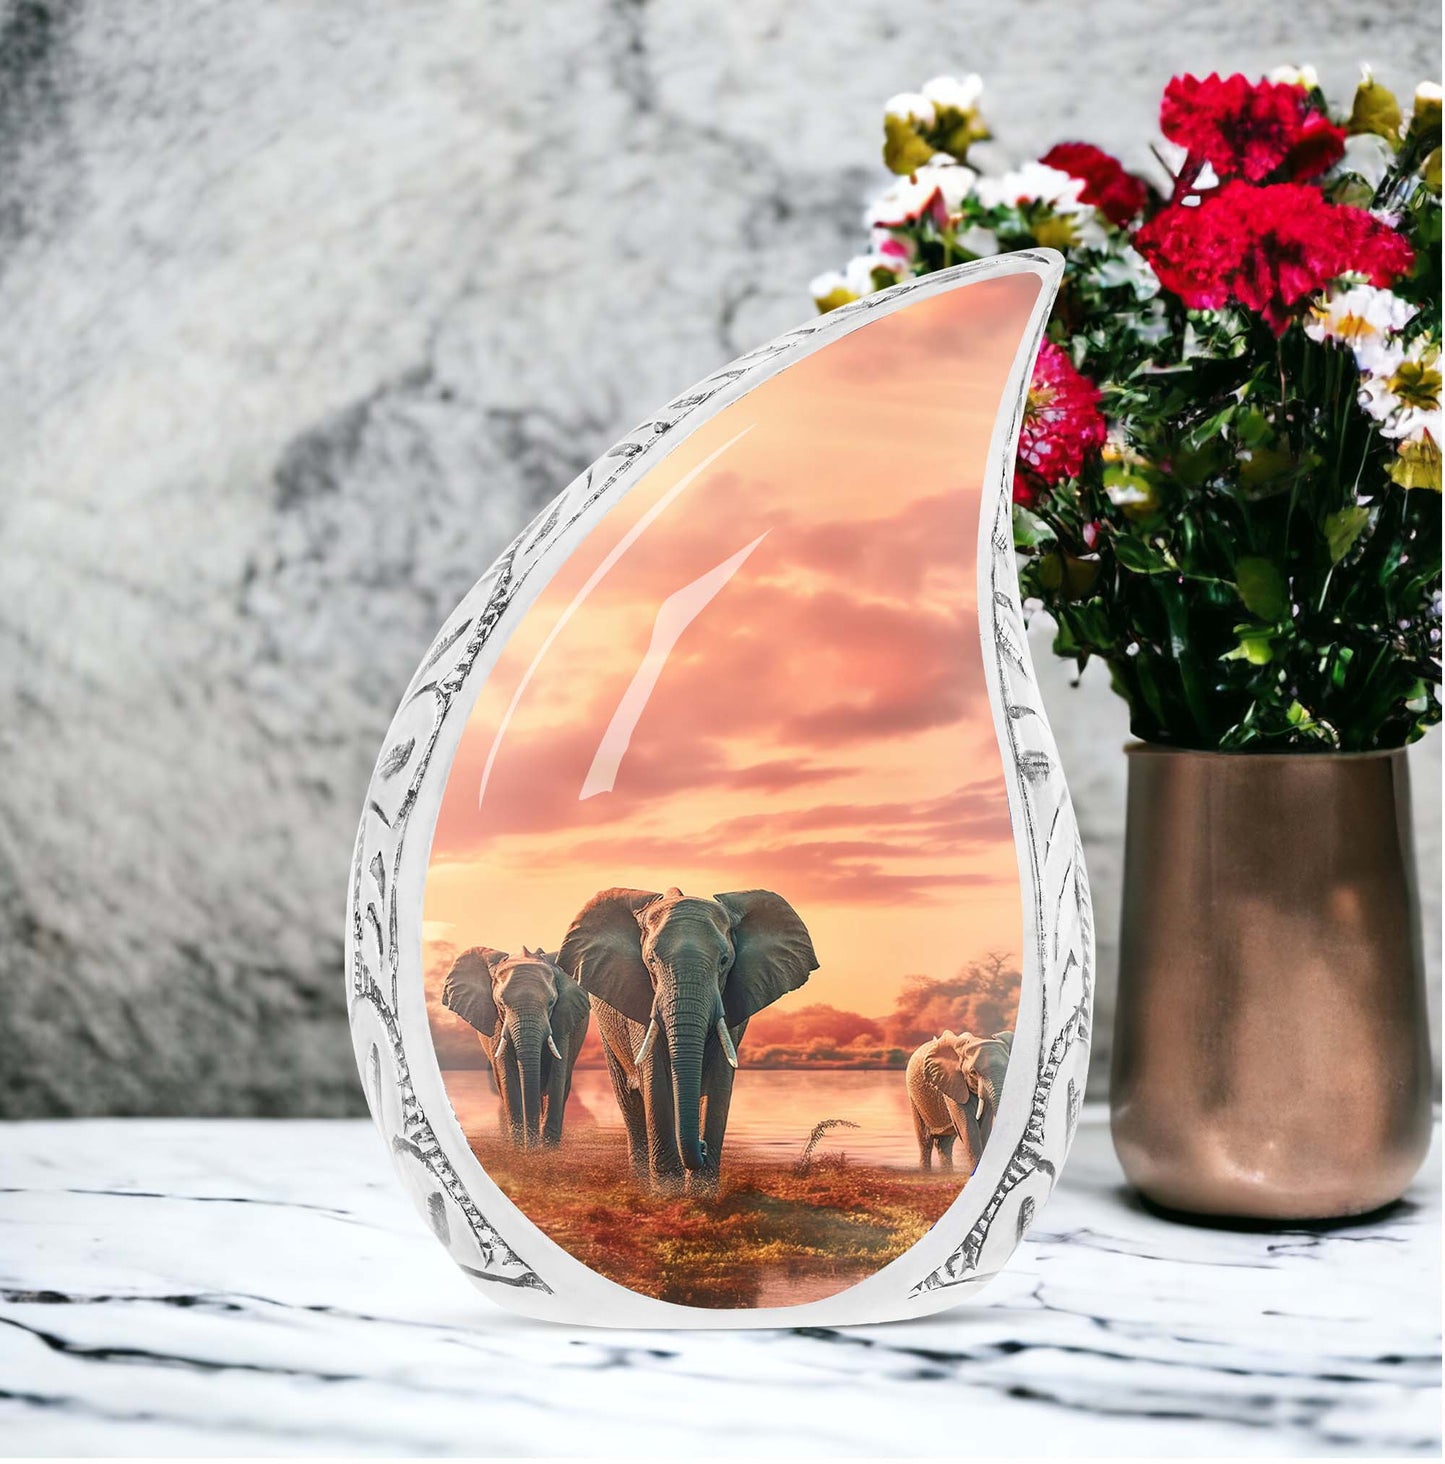 Large urn for human ashes featuring an elephant walking through a field design, suitable for funeral usage